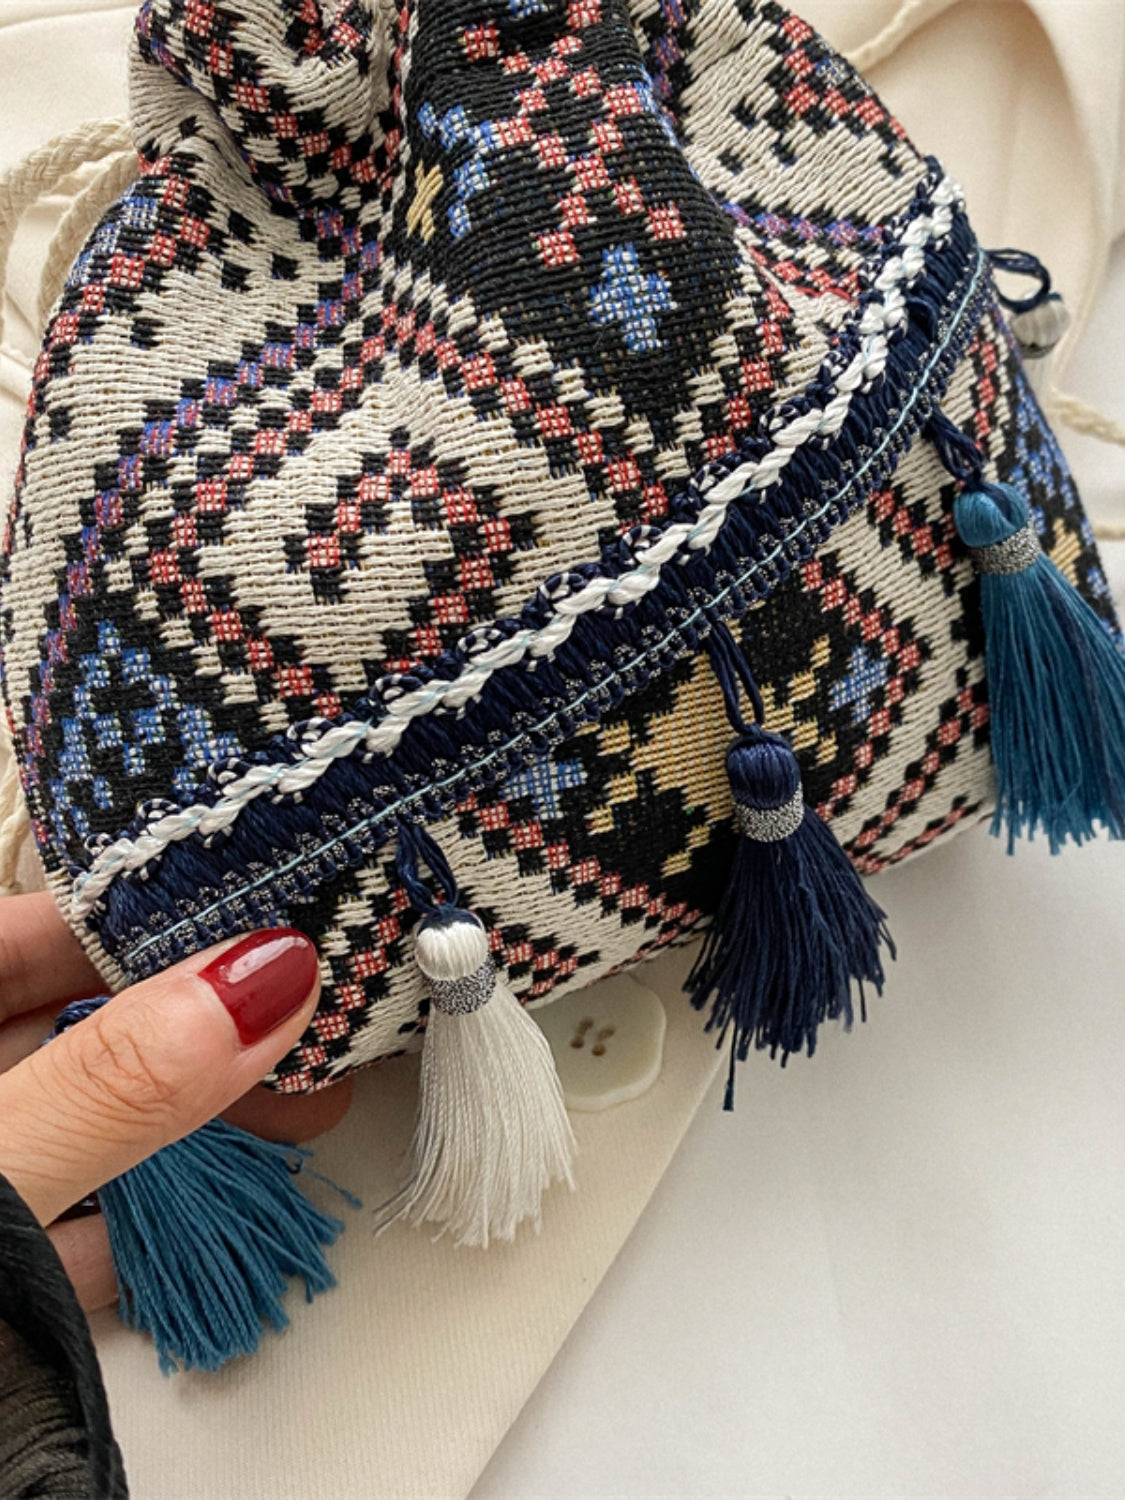 Black woven drawstring pouch bag featuring intricate geometric patterns and tassels.